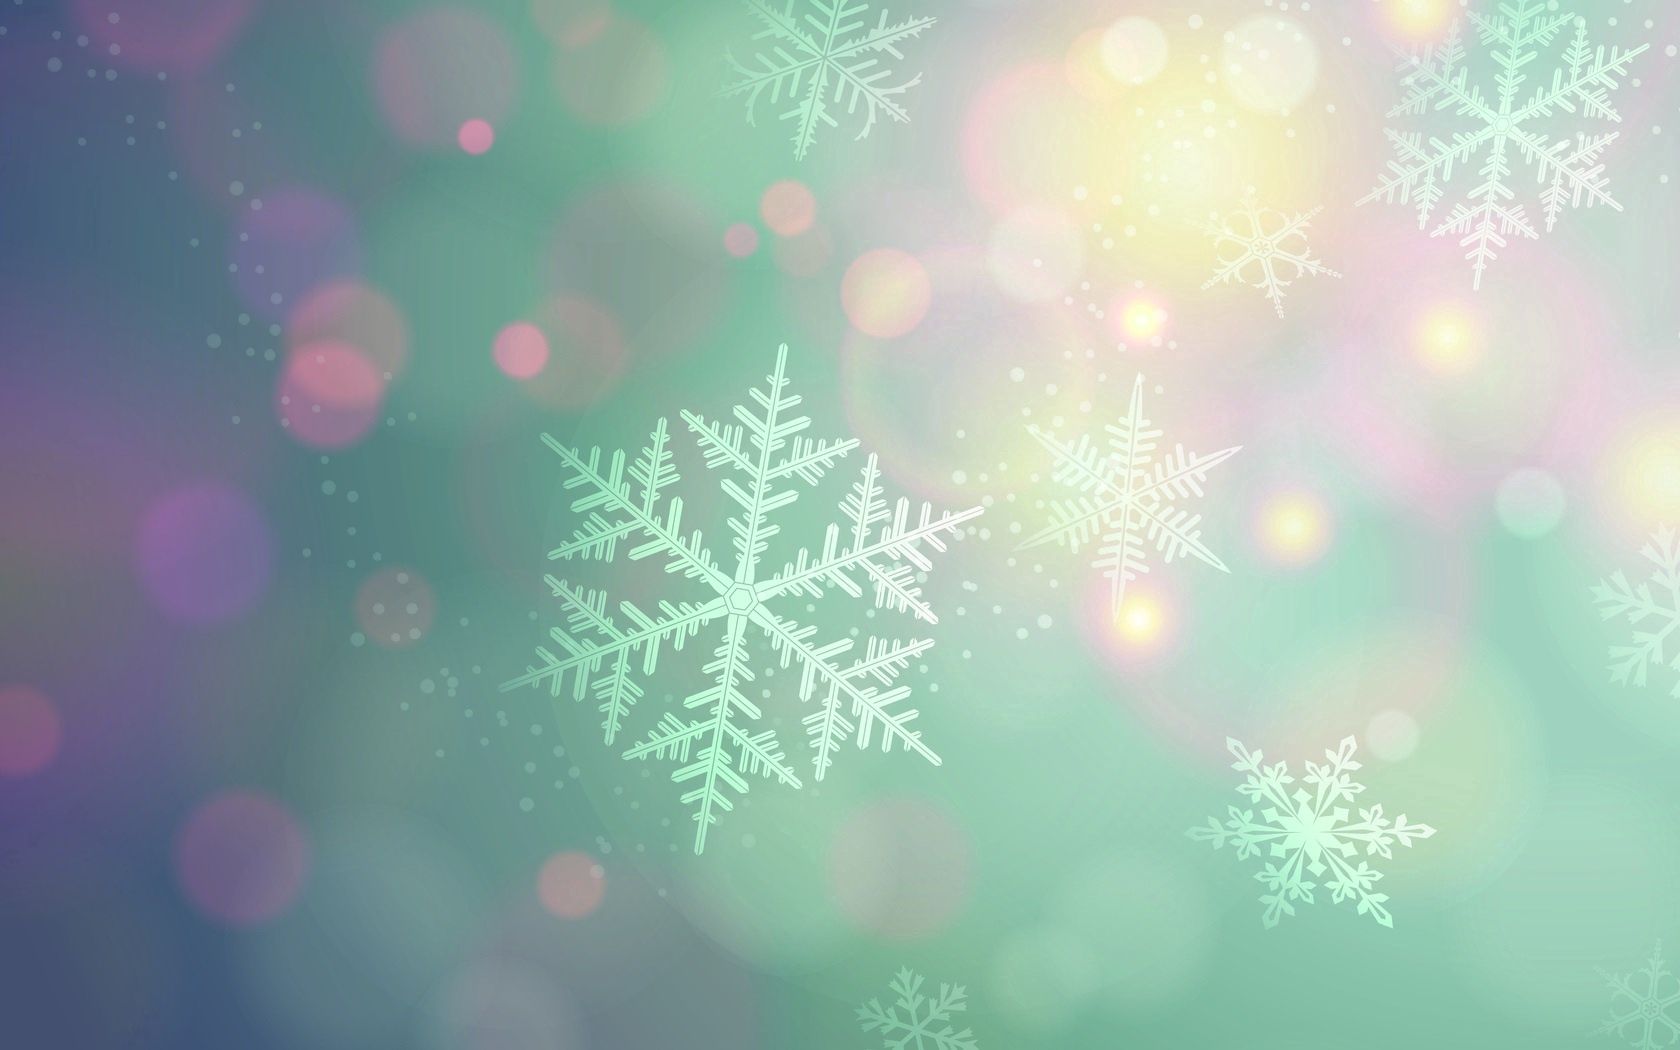 PC Wallpapers spots, snowflakes, abstract, background, light, light coloured, stains